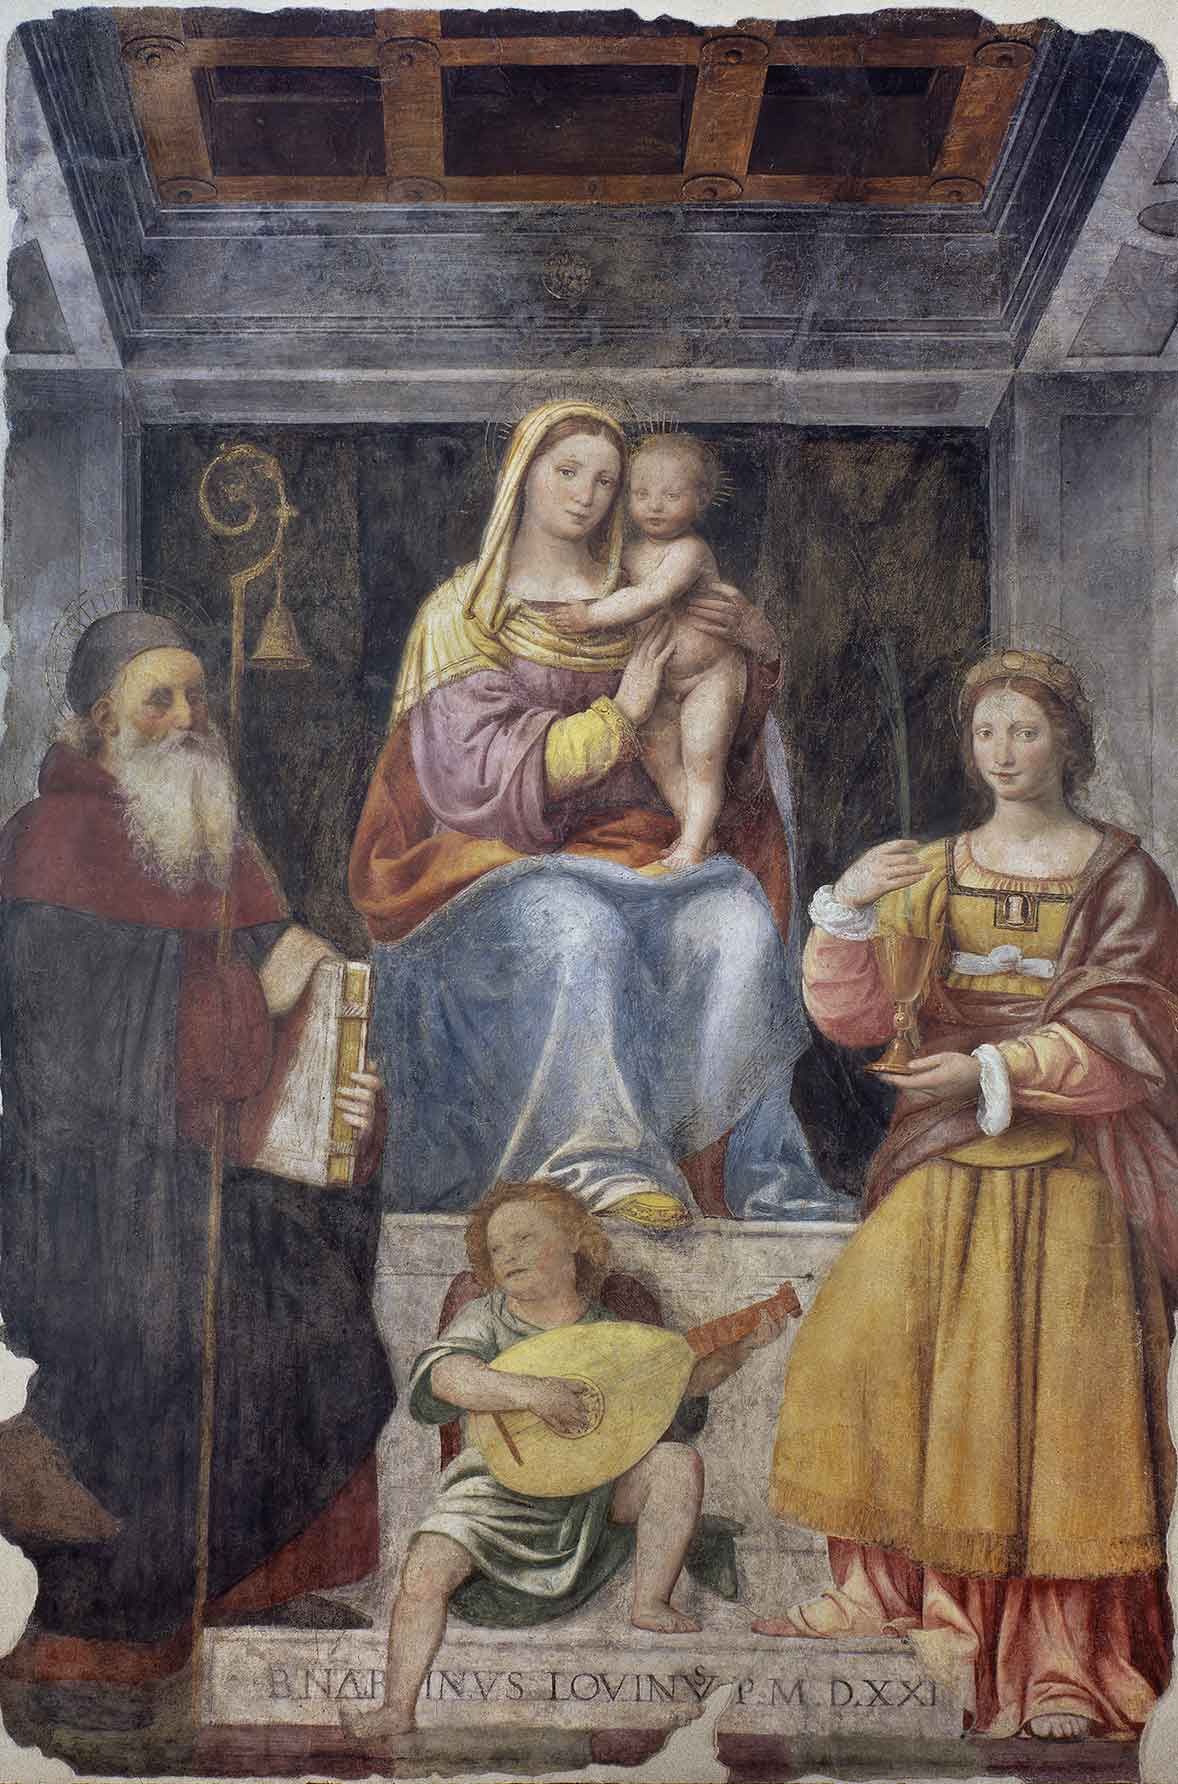 God the Father and Madonna and Child with St. Anthony the Abbot, St. Barbara and an Angel Musician